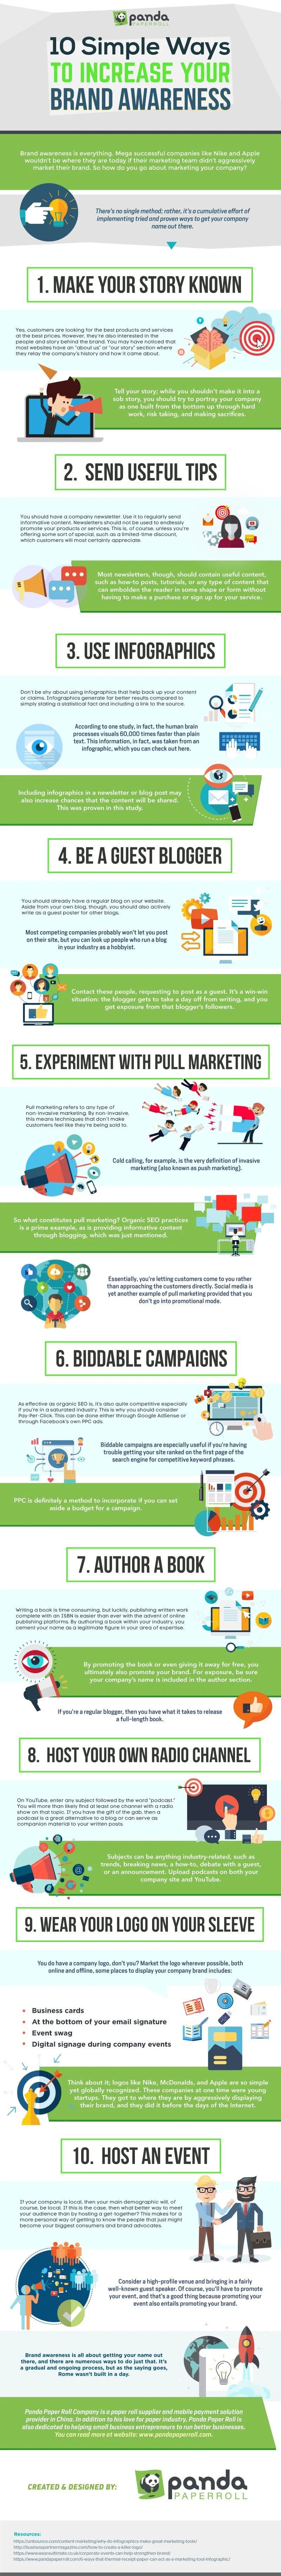 10 Simple Ways to Increase Brand Awareness - #Infographic